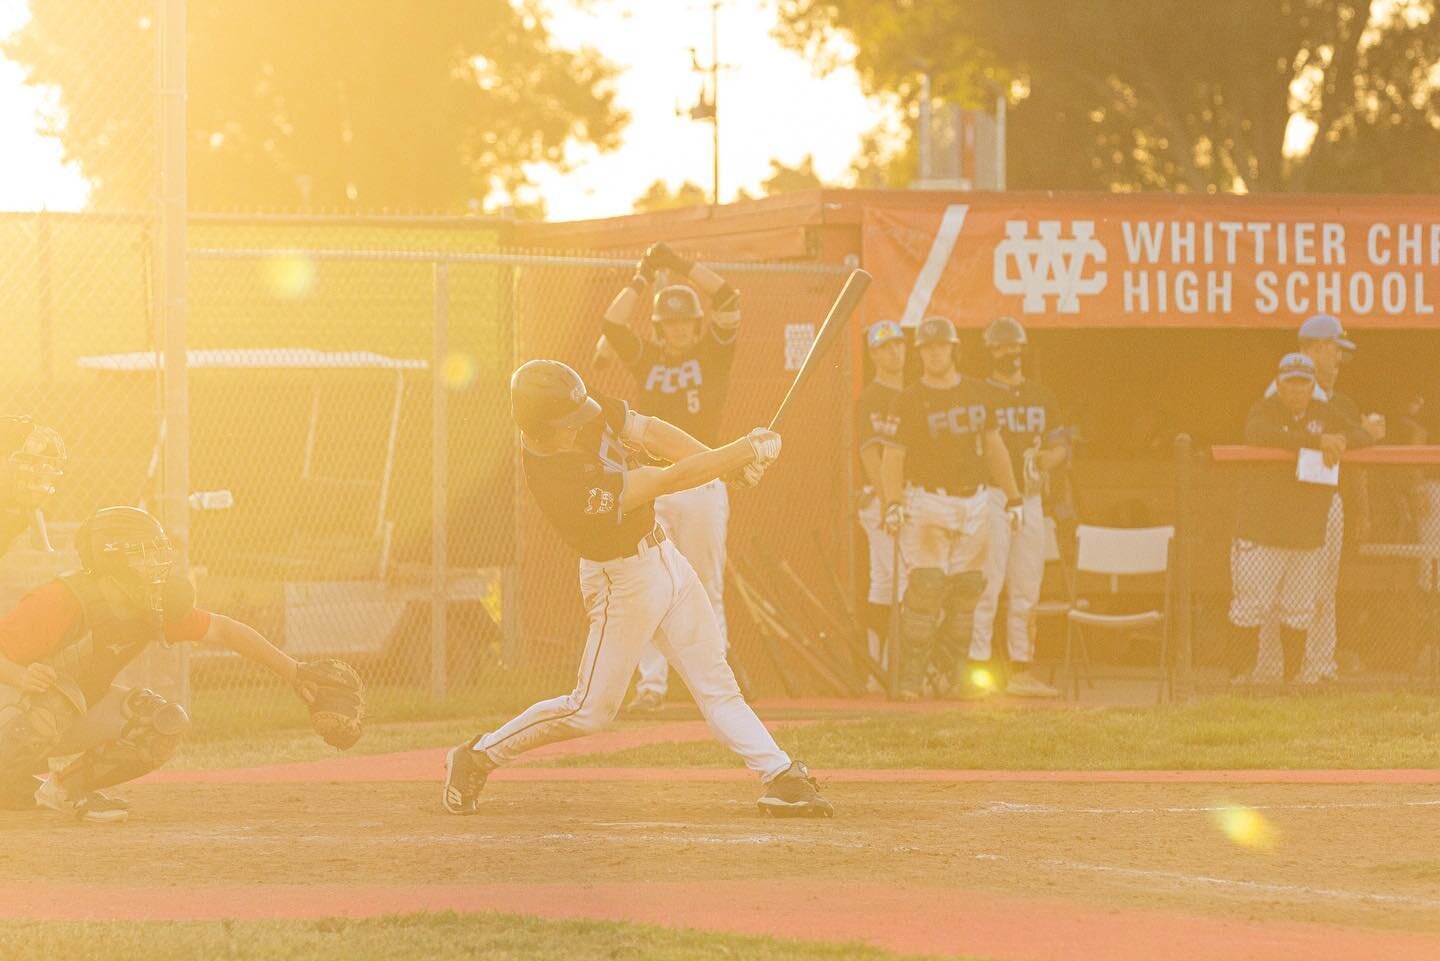 Can&rsquo;t wait for those midsummer, SoCal sunsets. Lots of great baseball and ministry in store for this year as we will be competing in the elite Best of the West division. Elevated level of play (D1-D2 caliber) and increased exposure are just a f